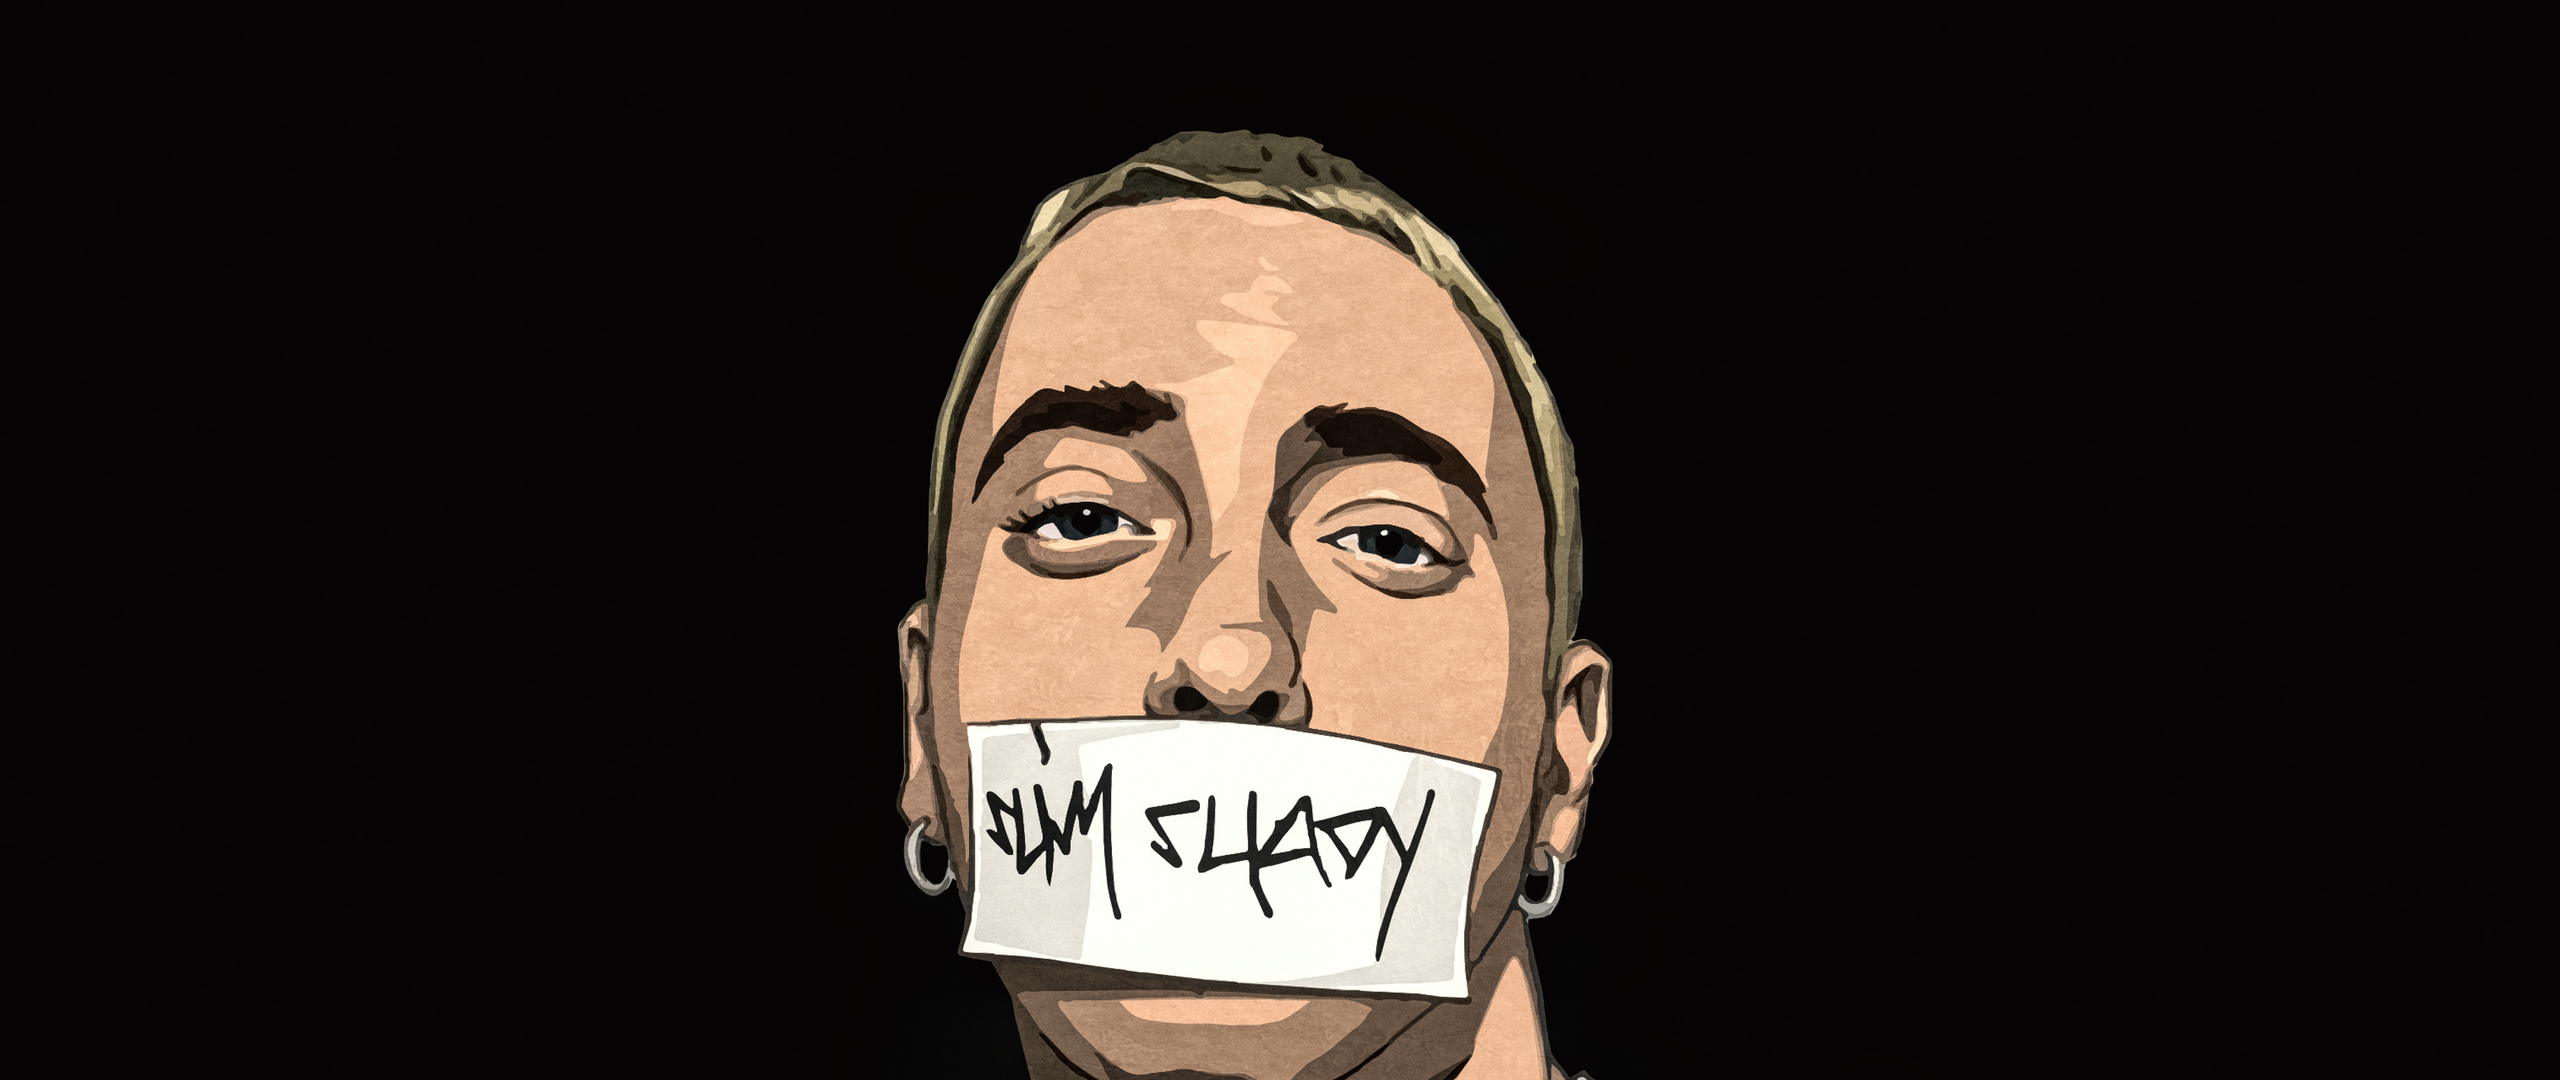 I Am Shady Eminem Art 2560x1080 Resolution HD 4k Wallpaper, Image, Background, Photo and Picture